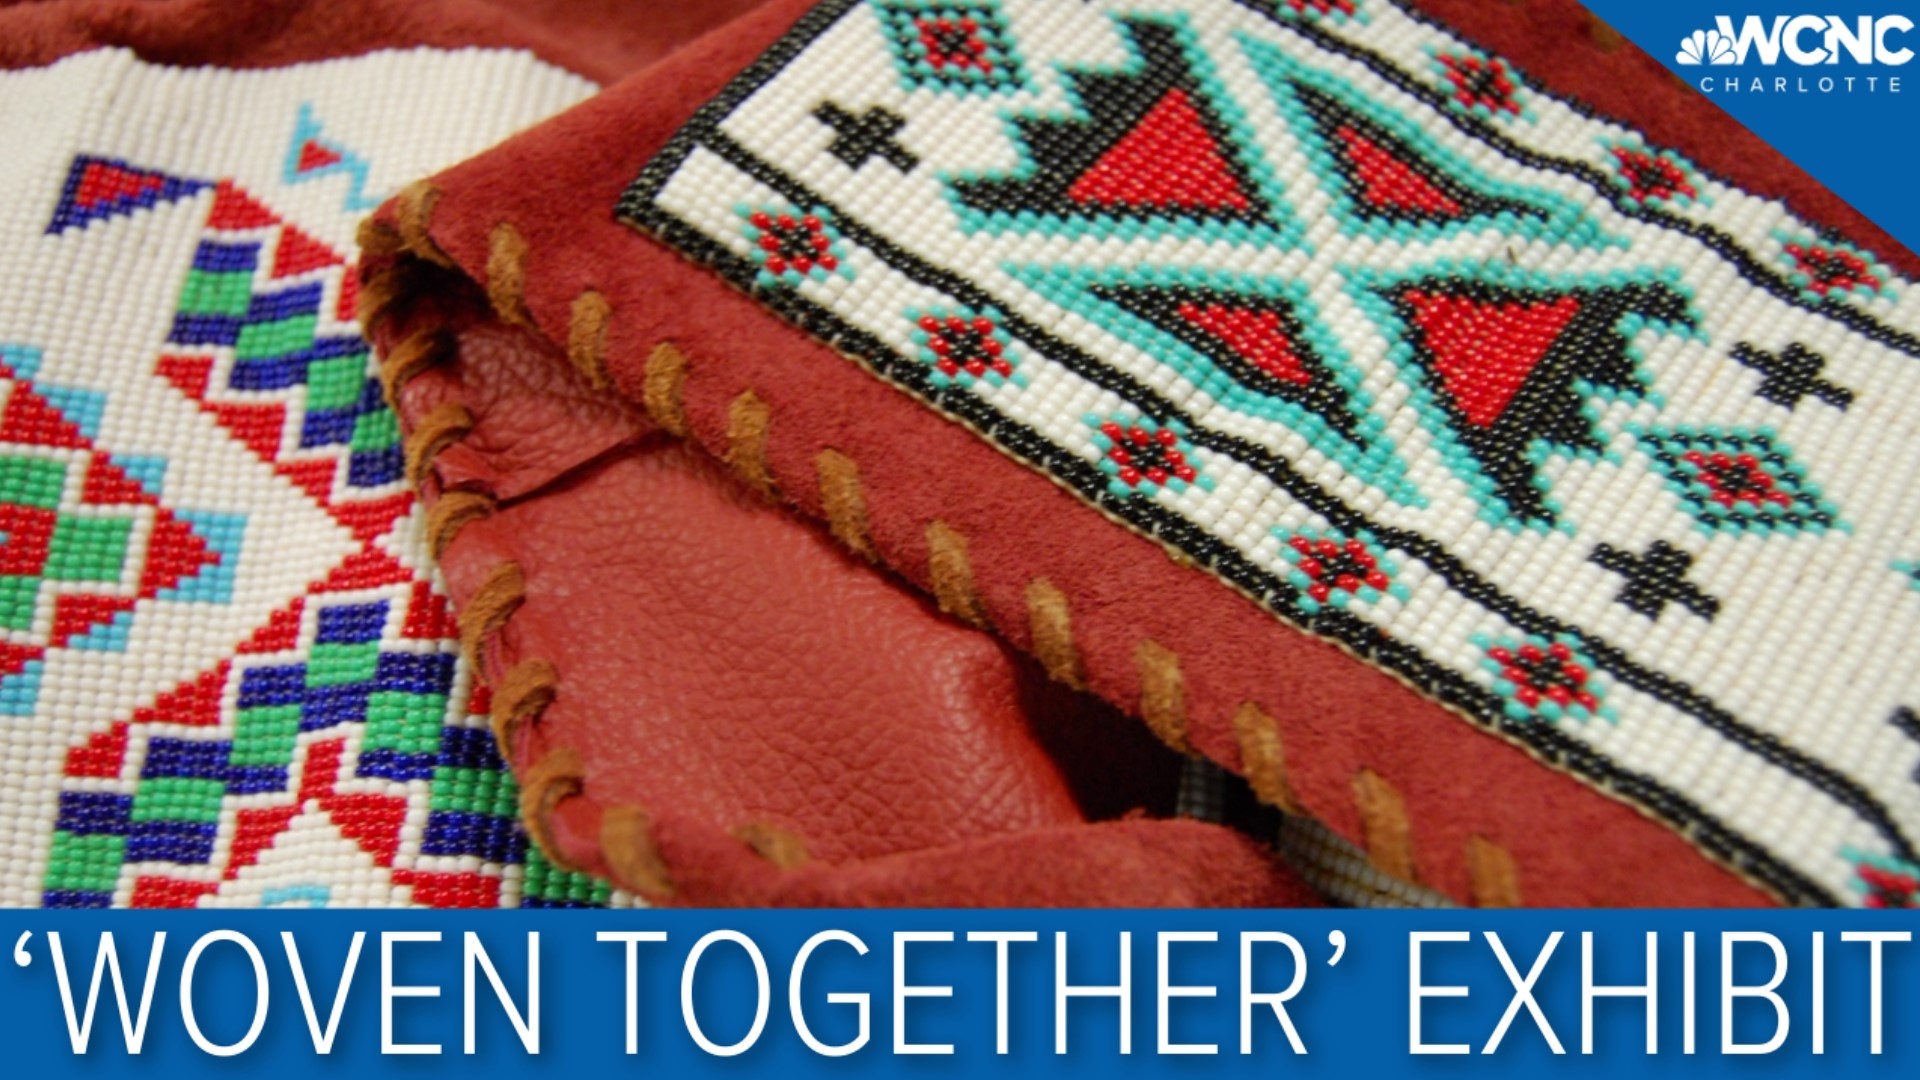 The exhibit, titled “Woven Together: Fiber Art within Special Collections,” features regalia, leatherwork, beadwork, jewelry and more.